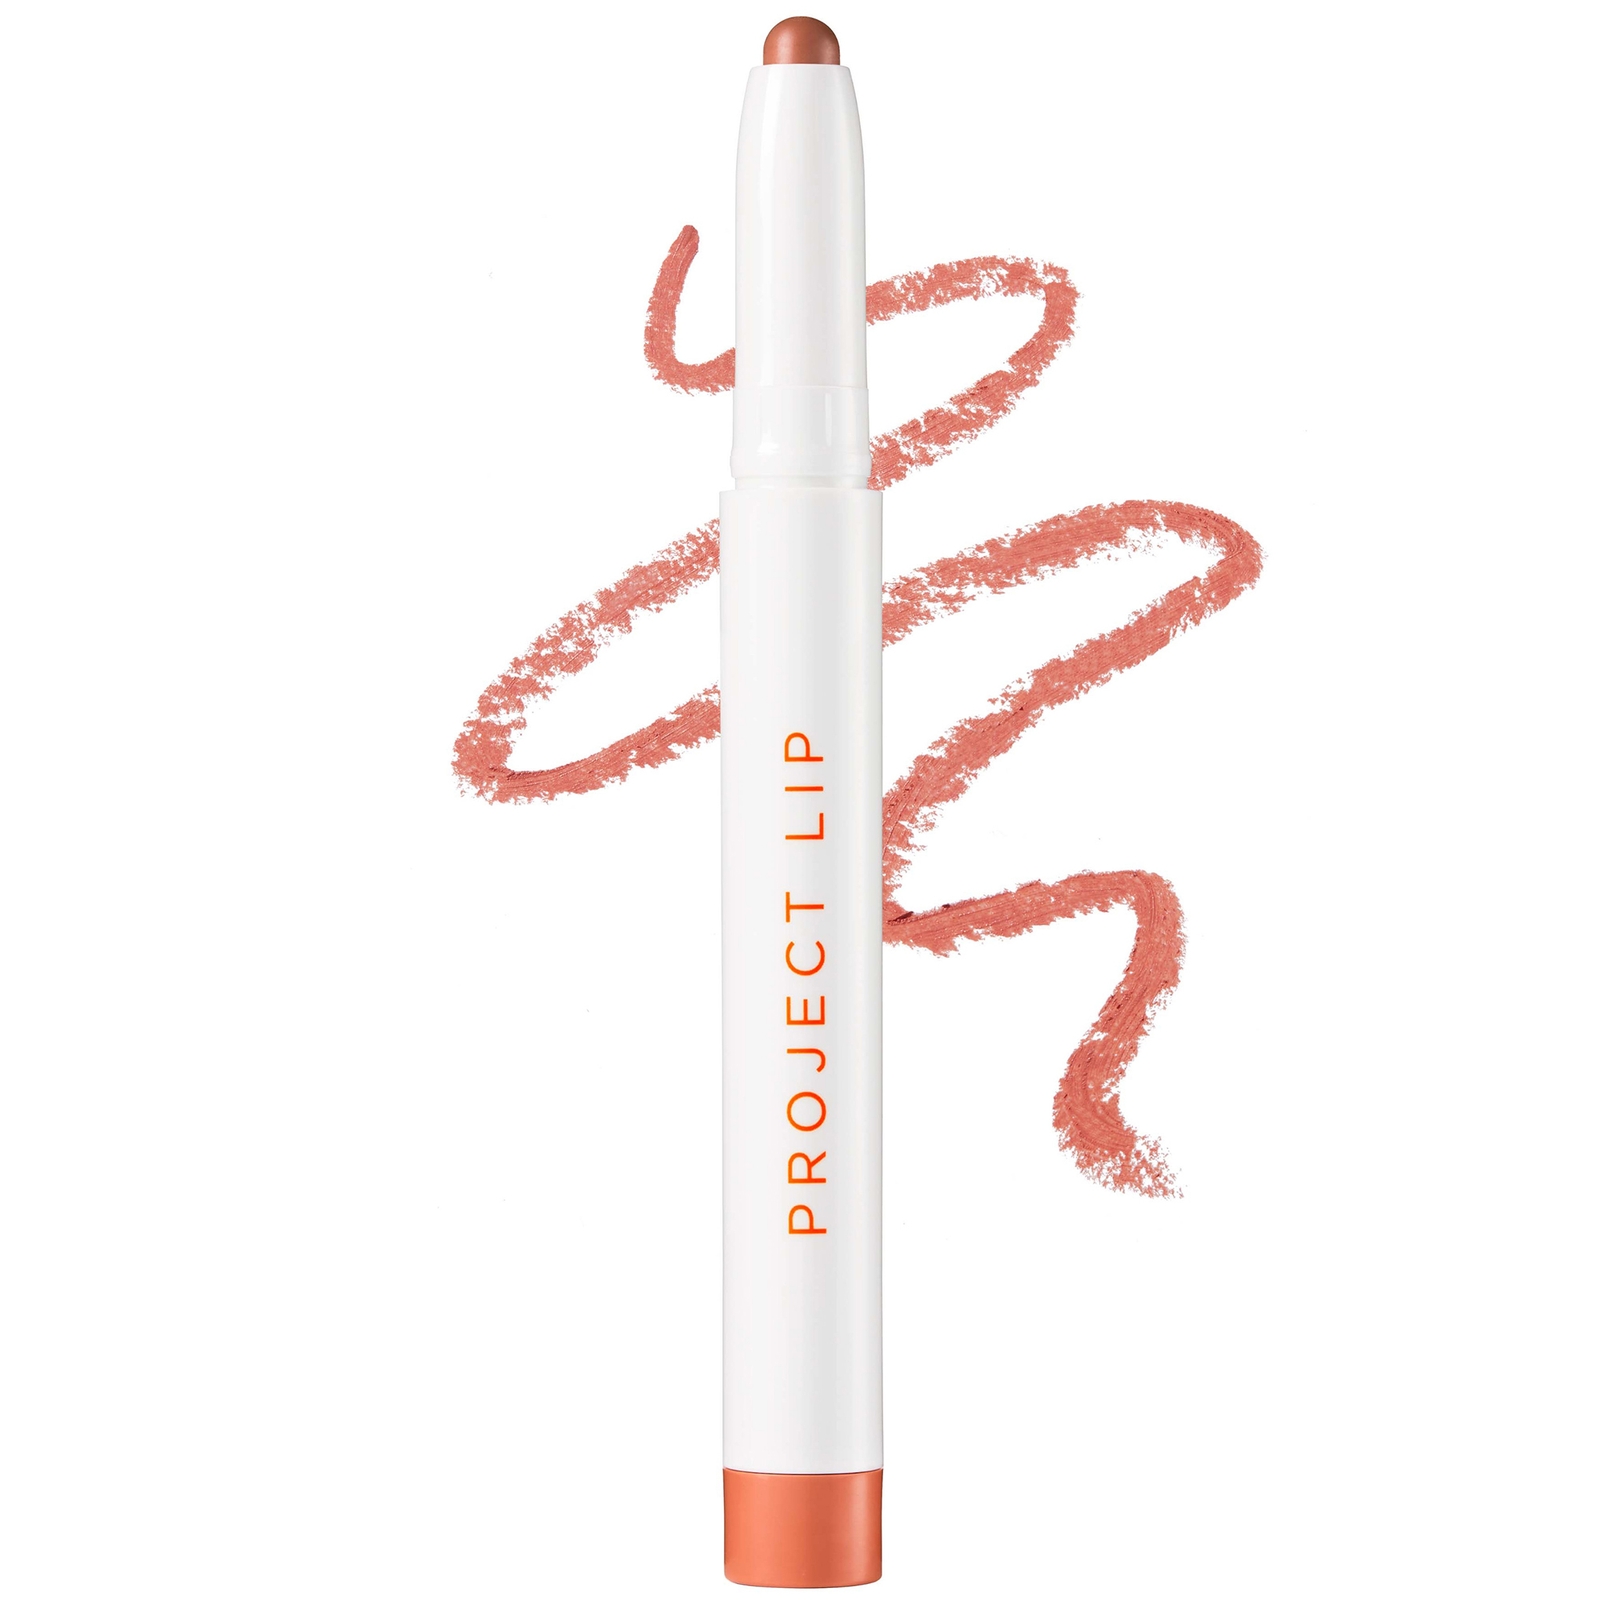 Project Lip Plump and Fill Lip Liner 1.7g (Various Shades) - Undone